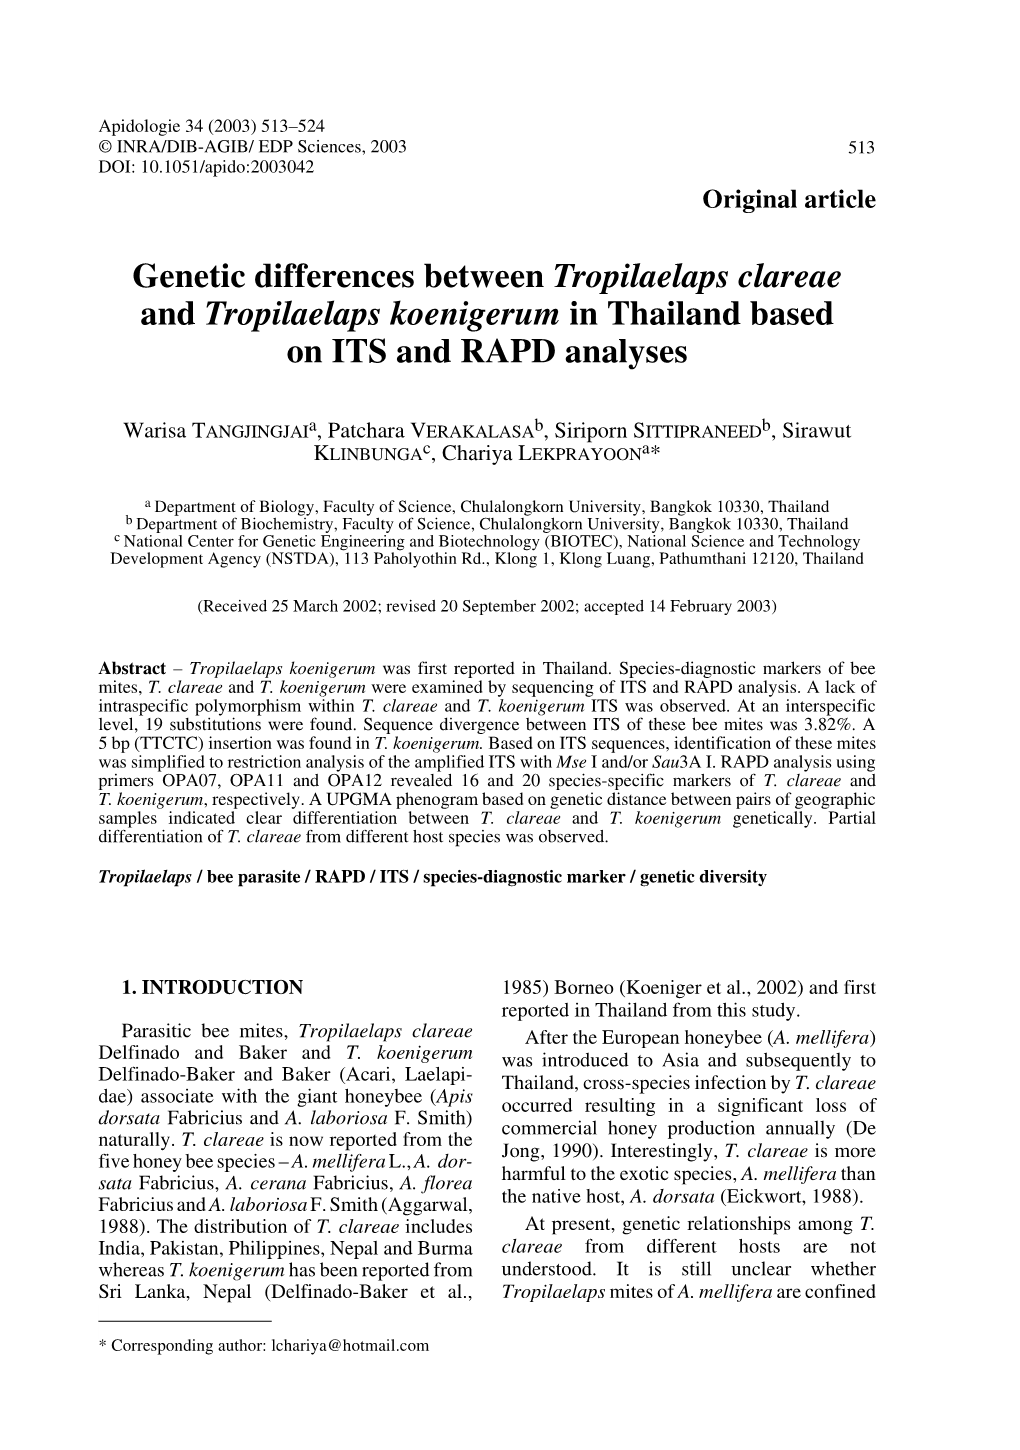 Genetic Differences Between Tropilaelaps Clareae and Tropilaelaps Koenigerum in Thailand Based on ITS and RAPD Analyses